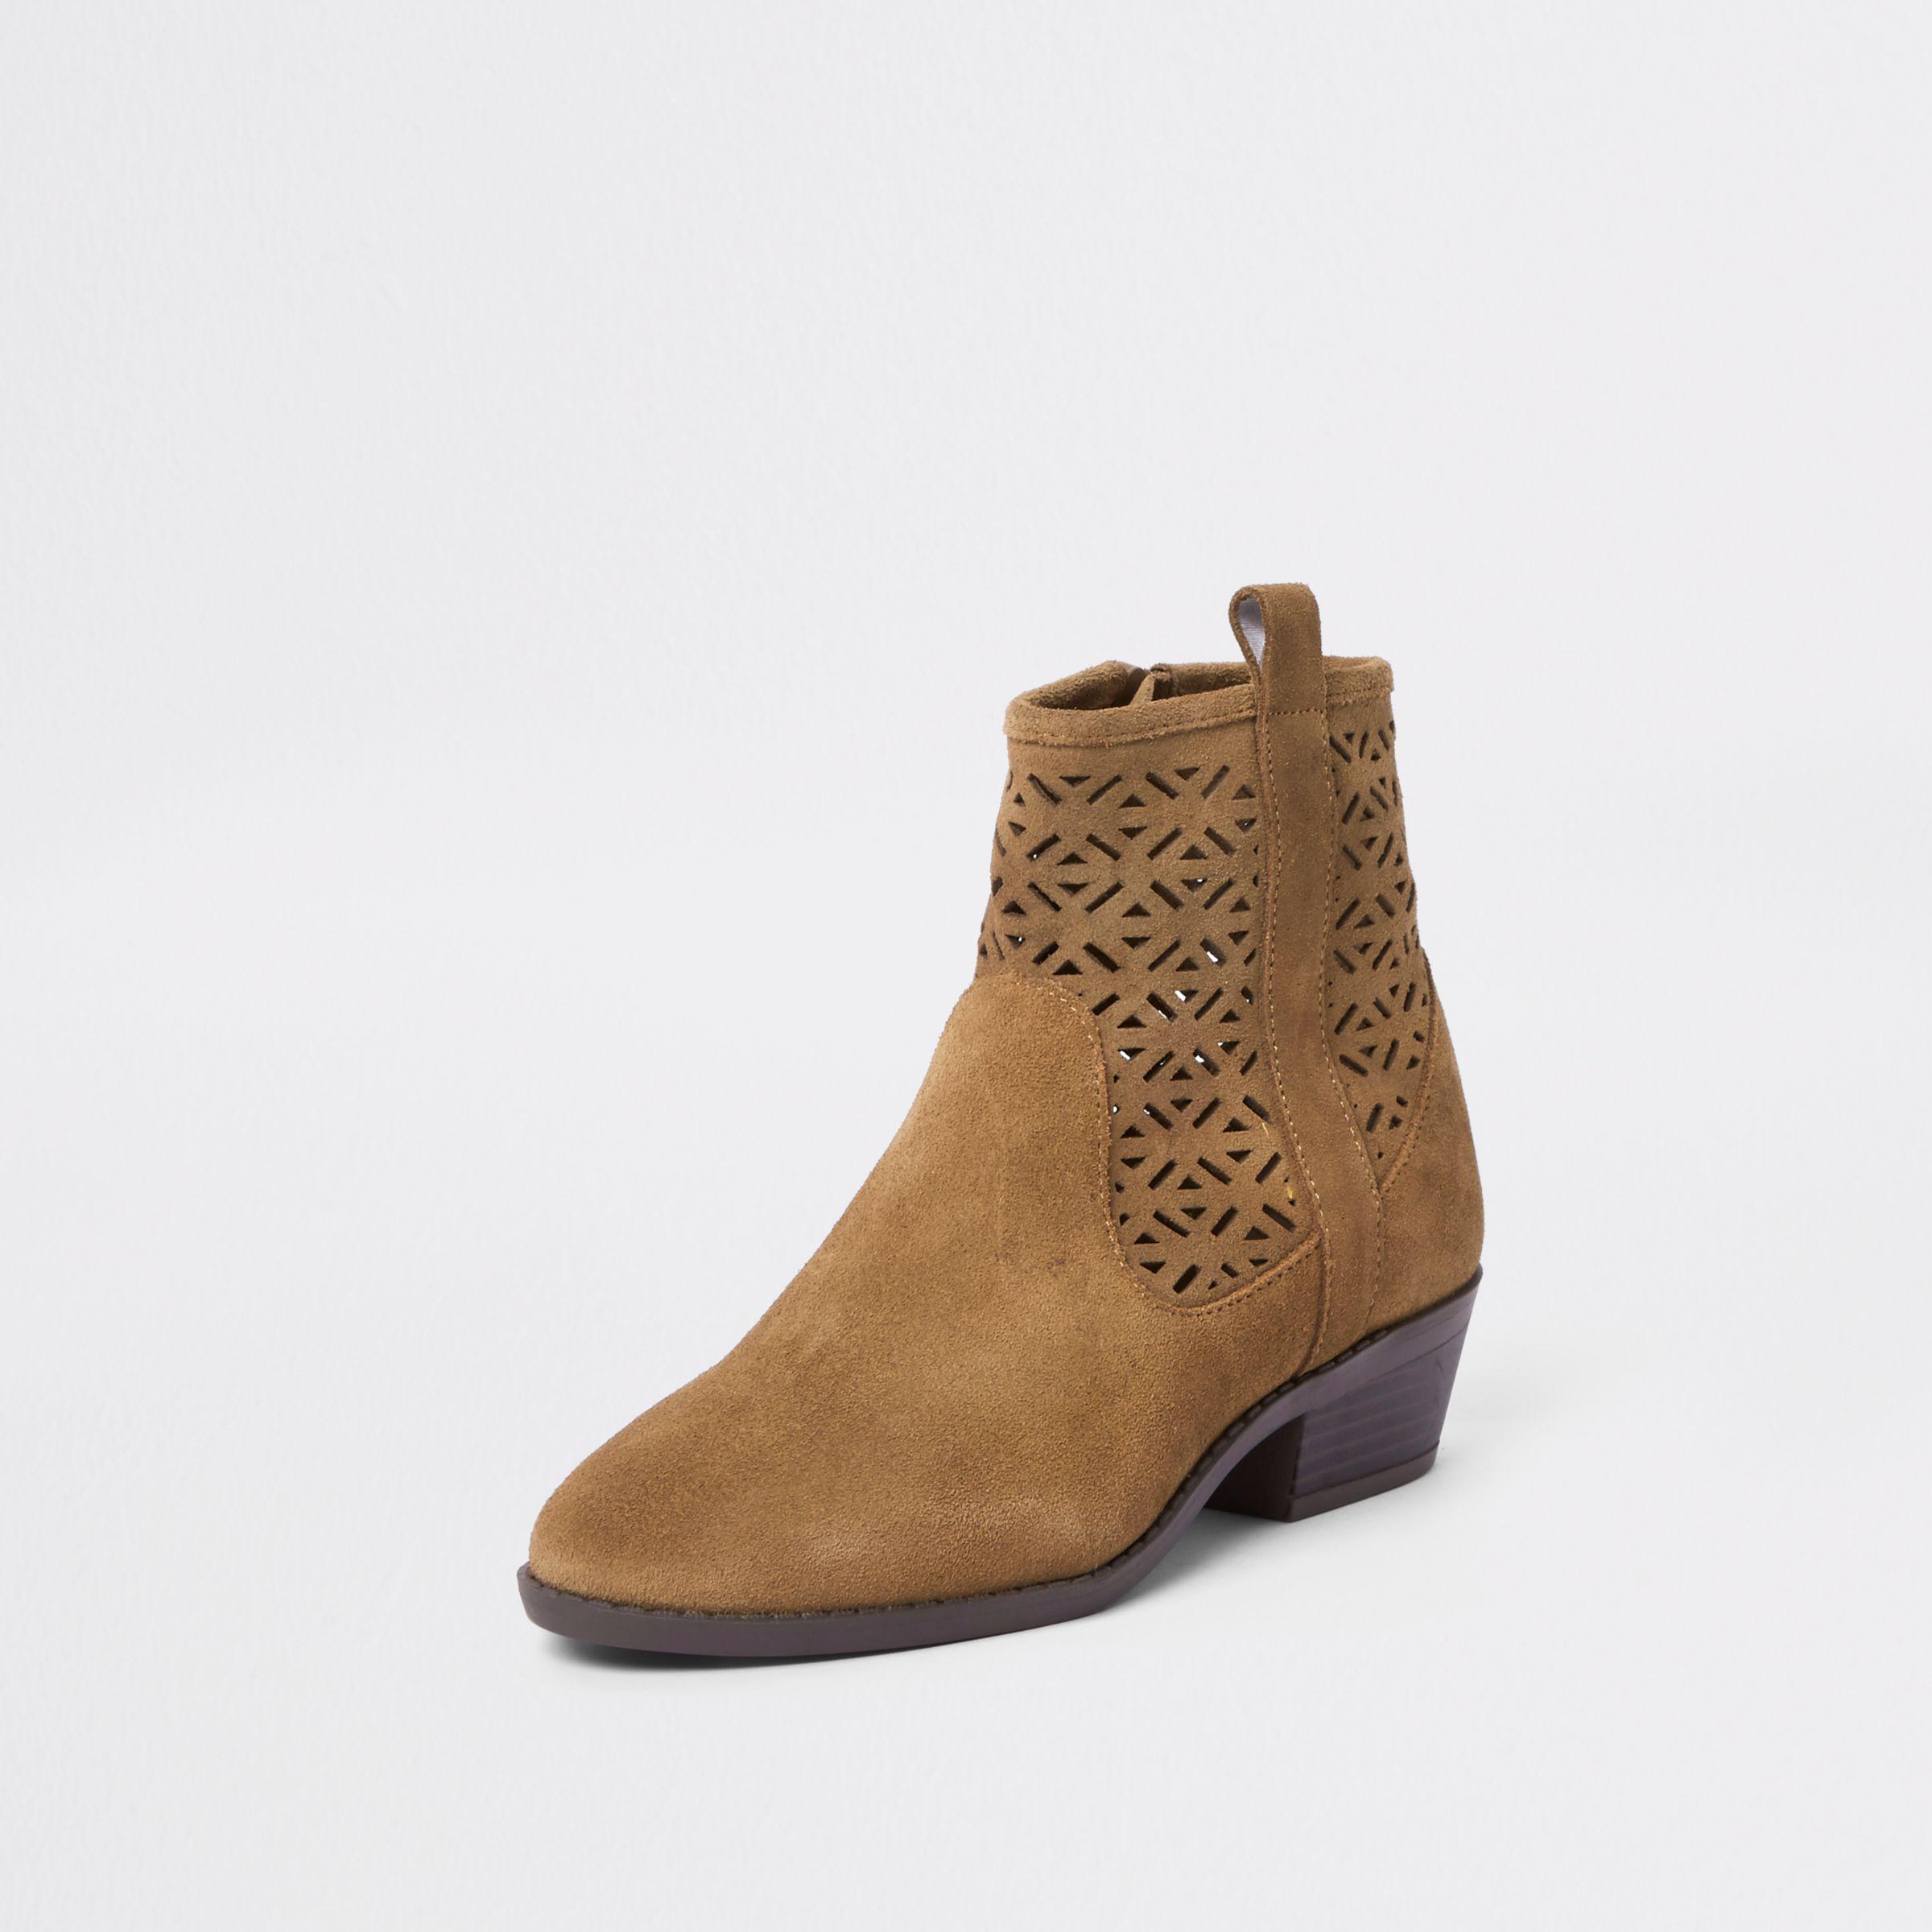 River Island Laser Cut Suede Western Ankle Boots in Tan (Brown) - Lyst